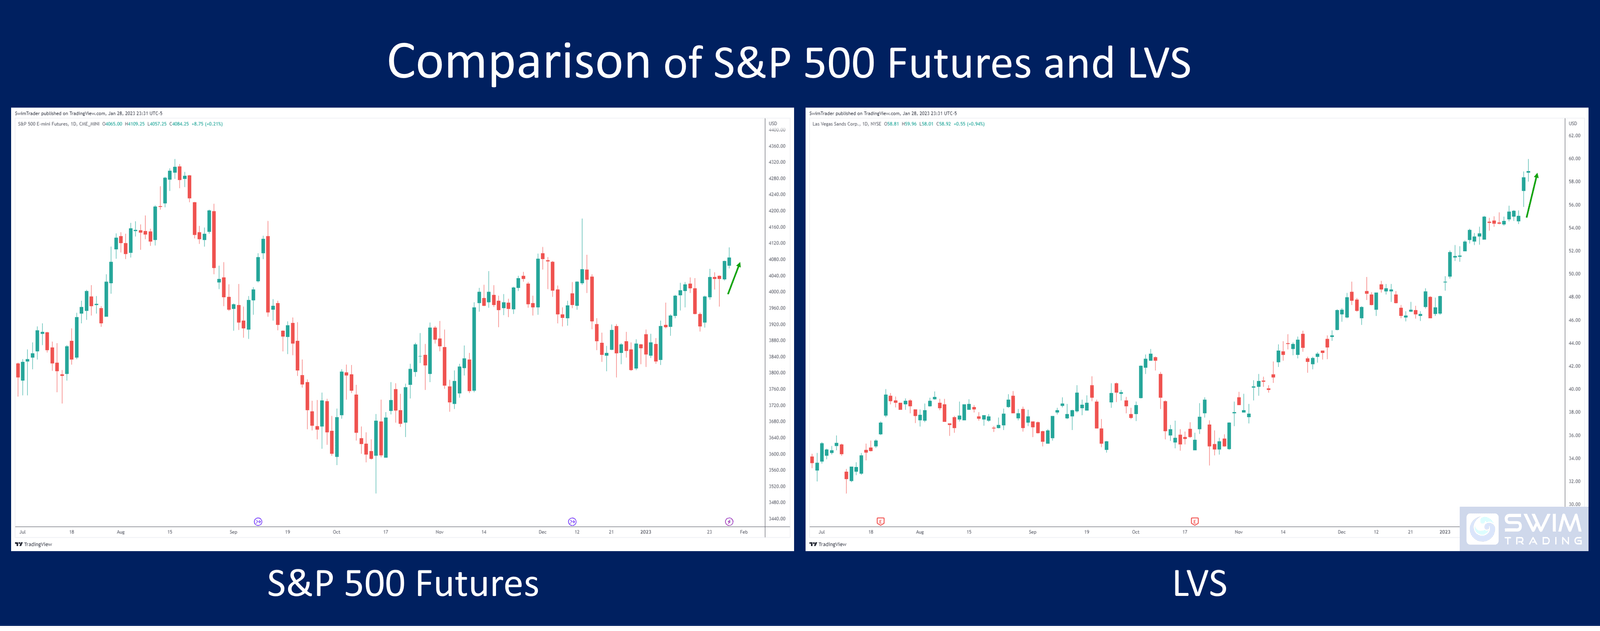 Chart of S&P 500 futures and Las Vegas Sands